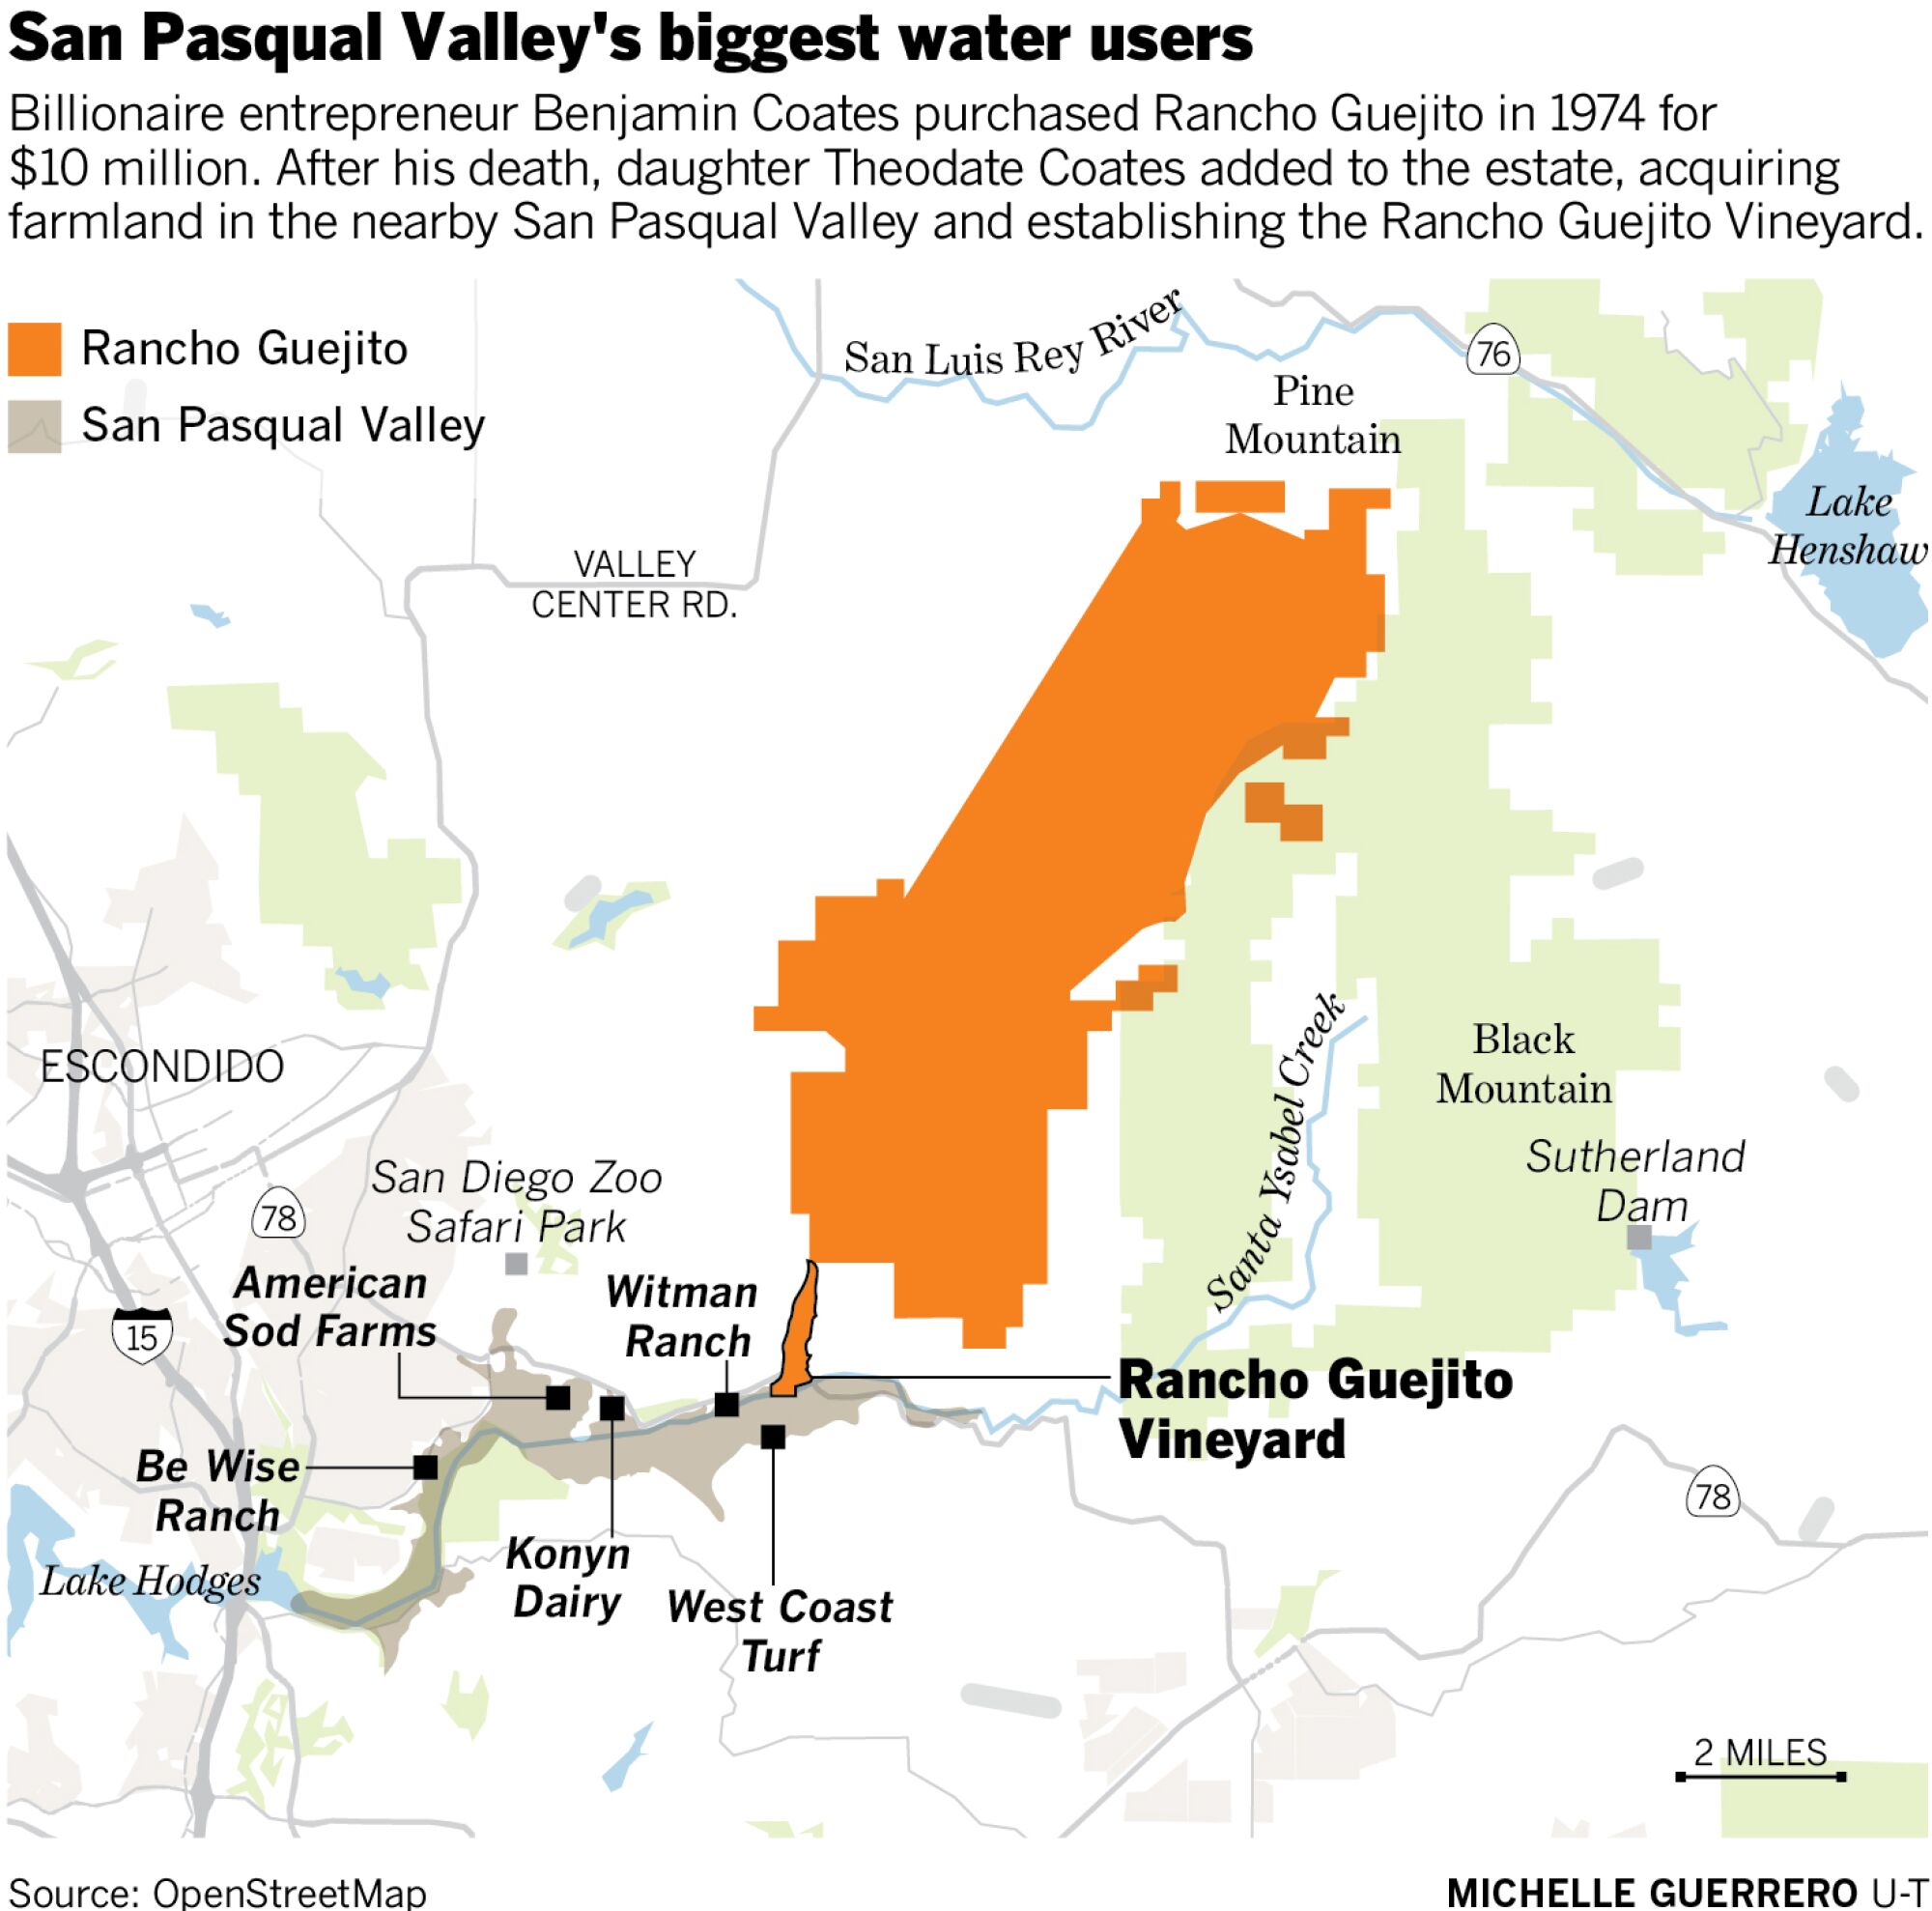 San Pasqual Valley's biggest water users